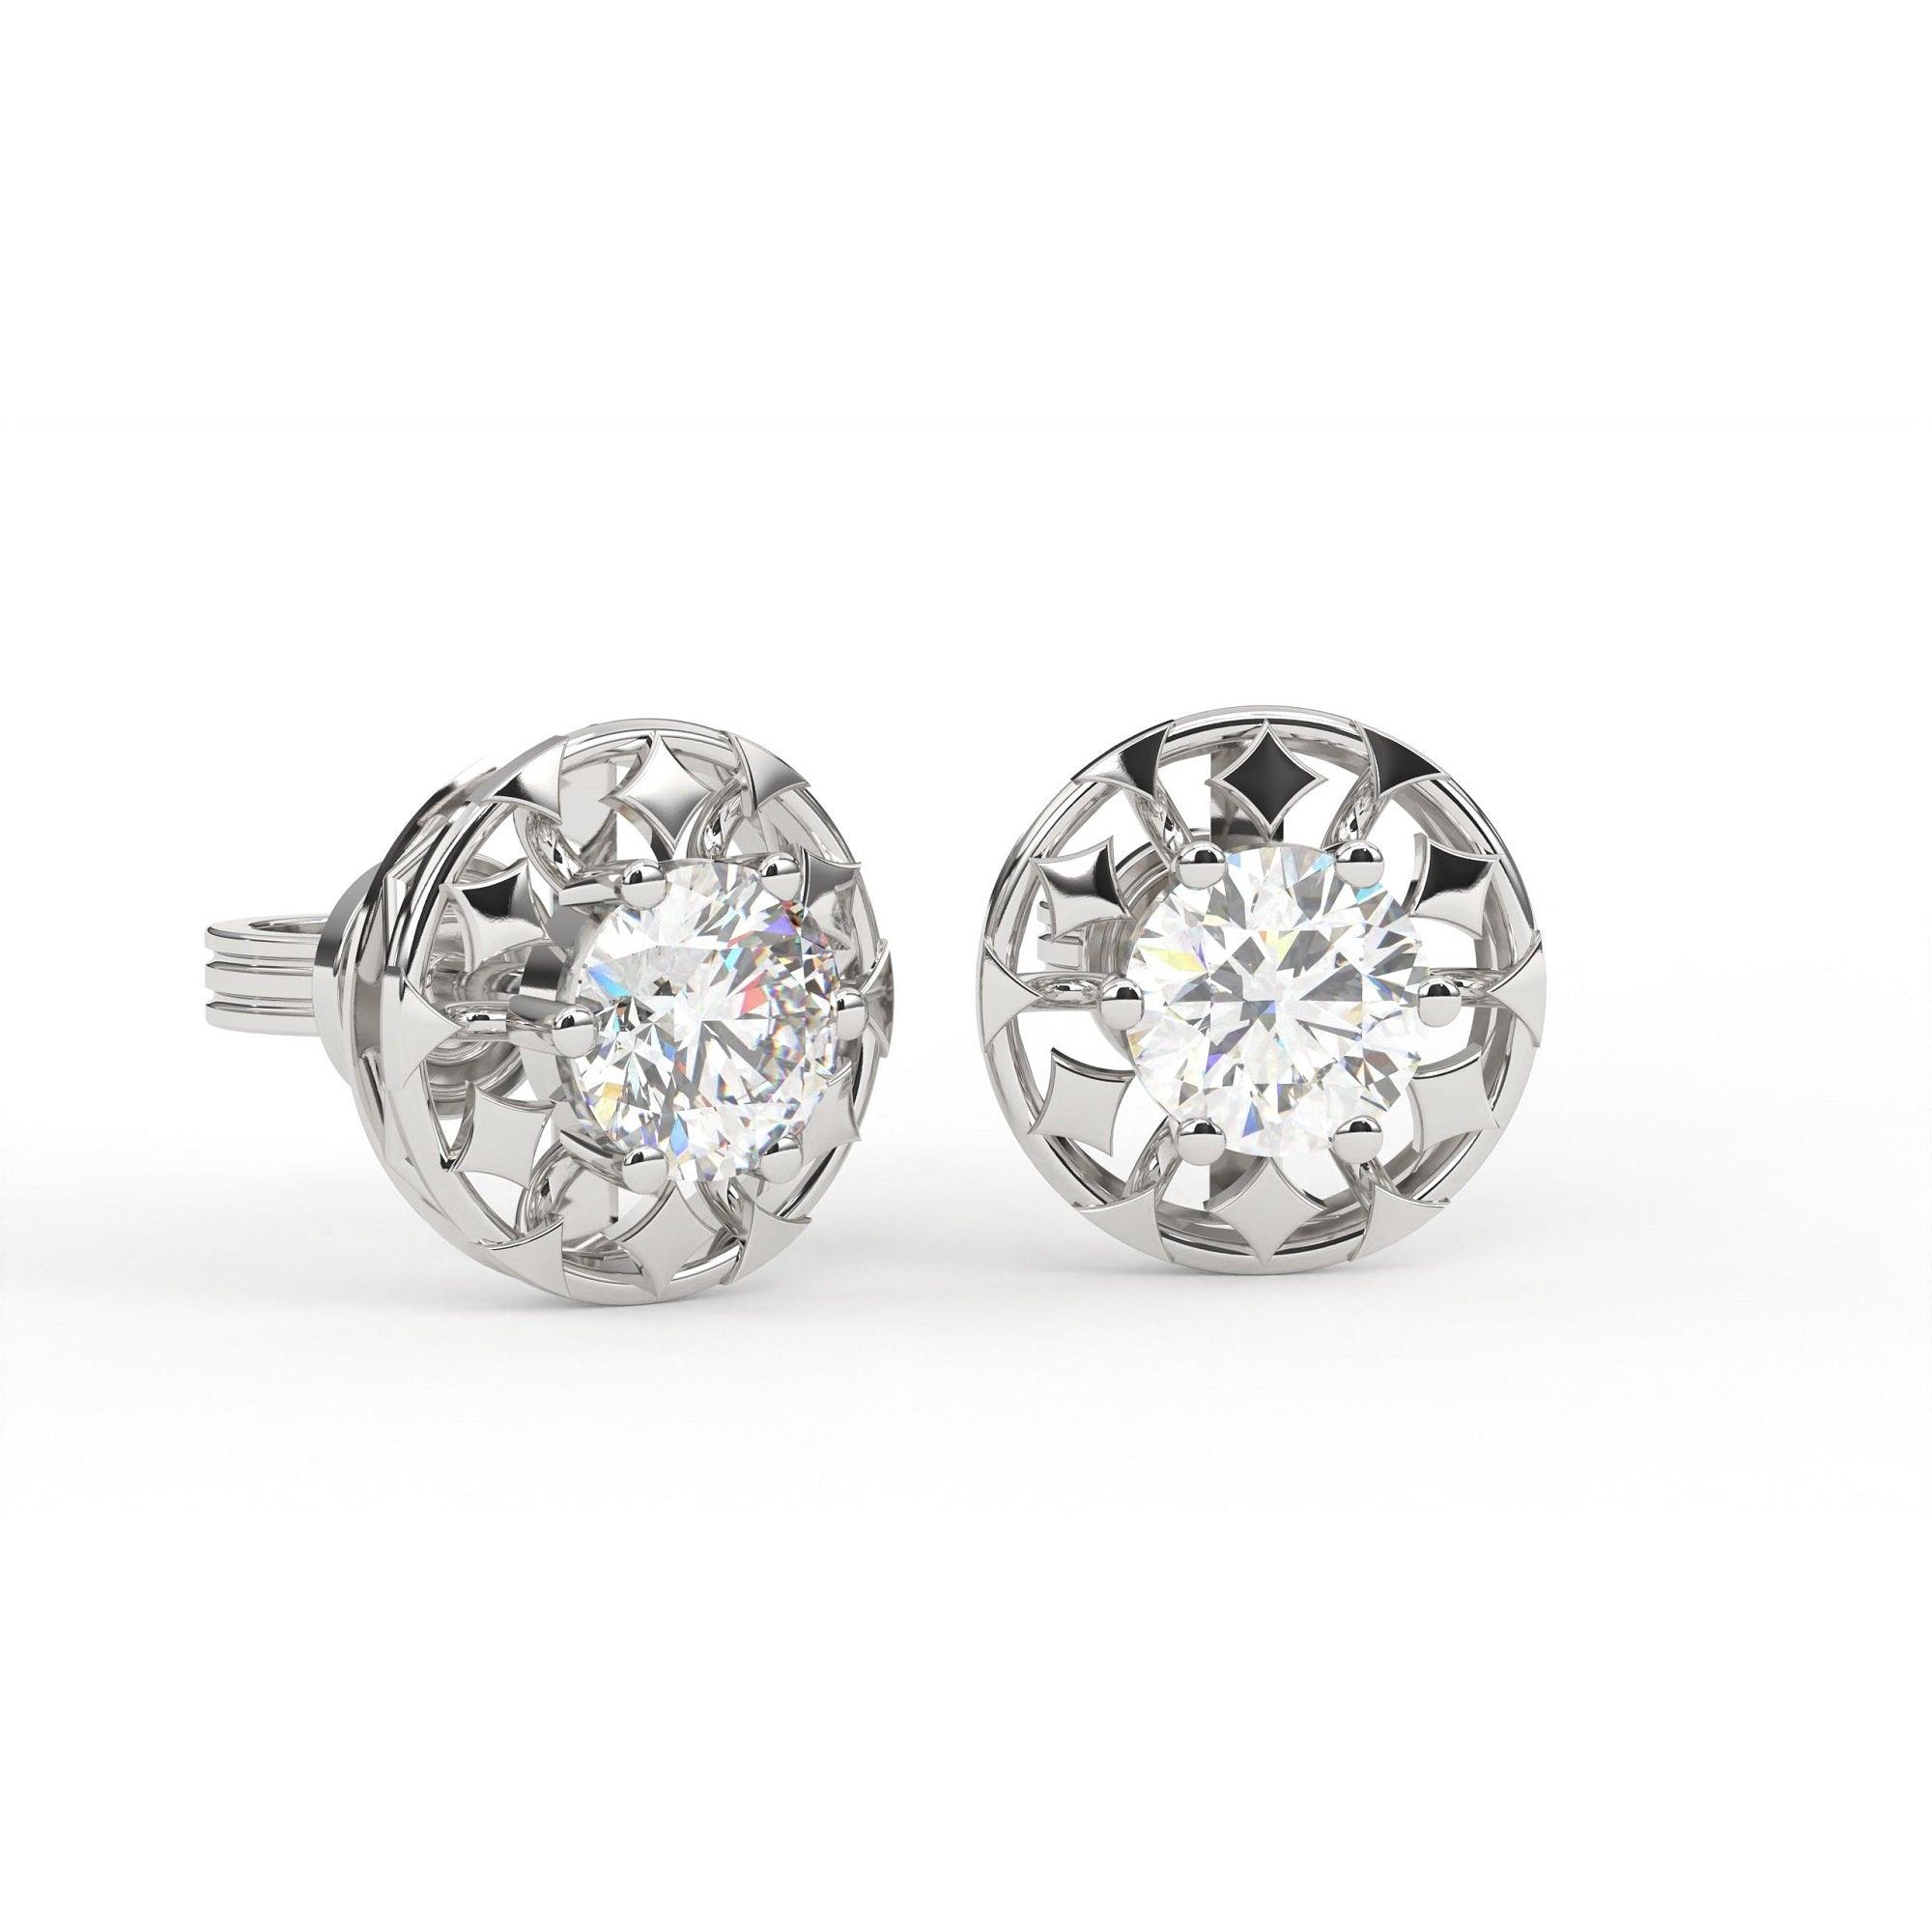 Auory 925 Sterling Silver Round Earring AUPE-315 - Auory